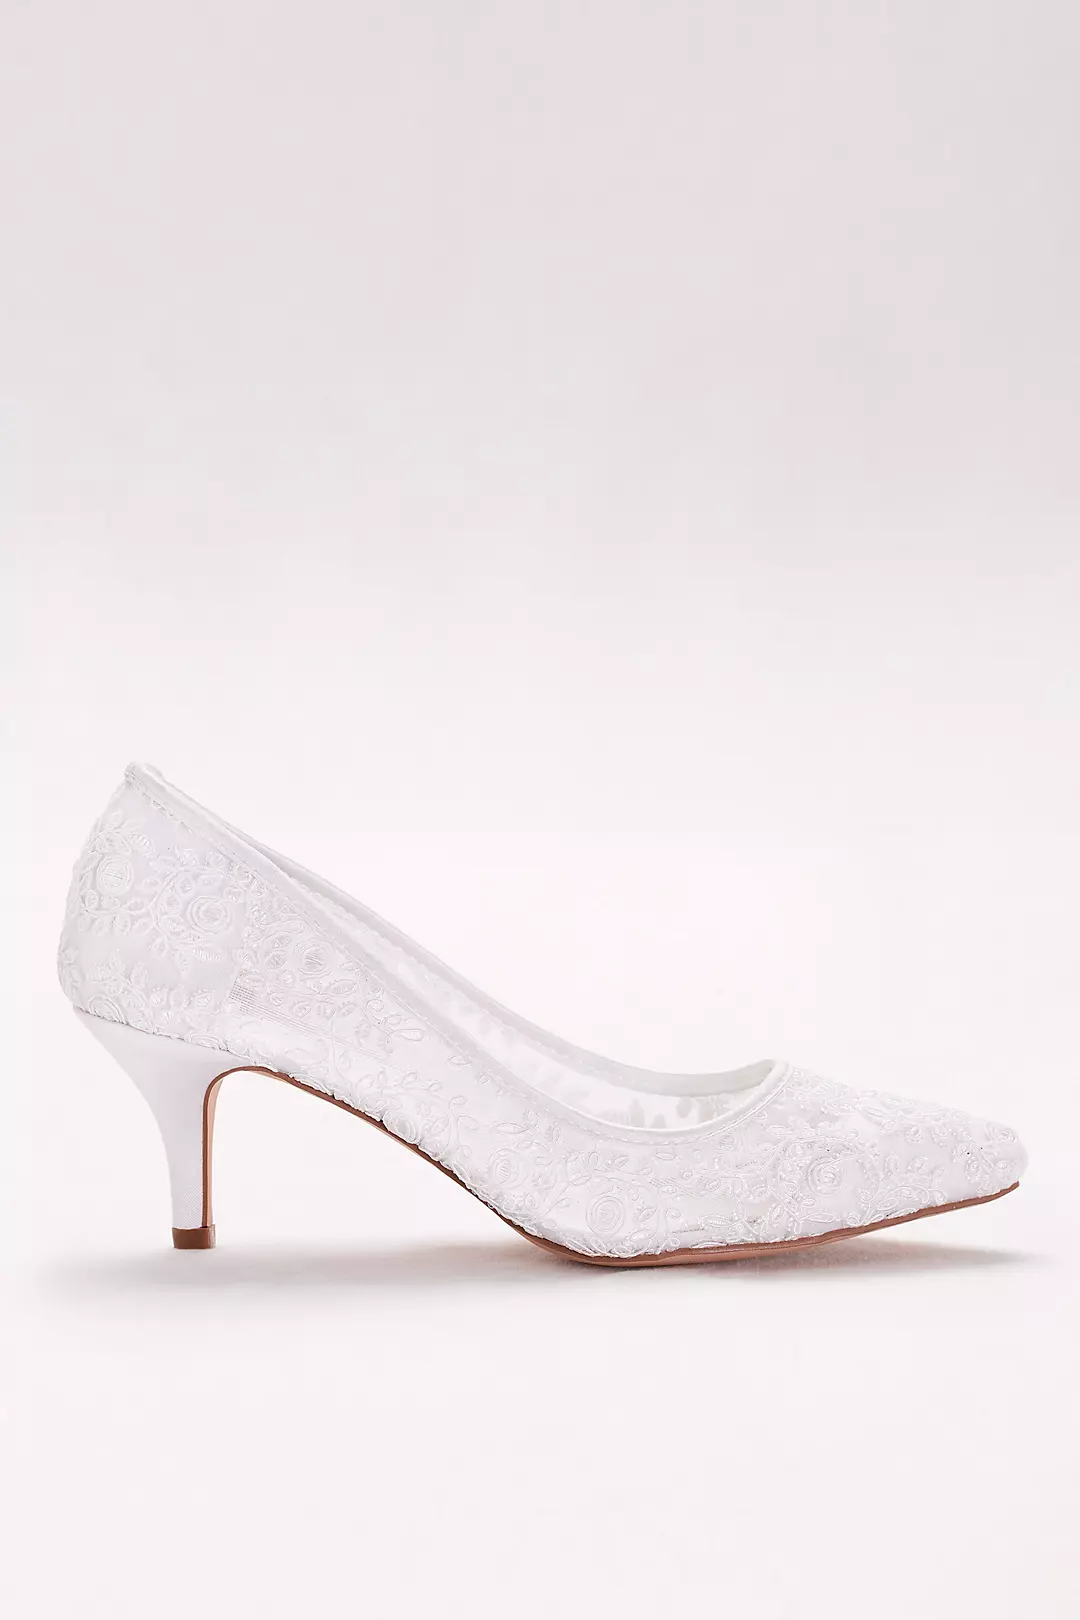 Embroidered Mesh Pointed-Toe Pumps Image 3